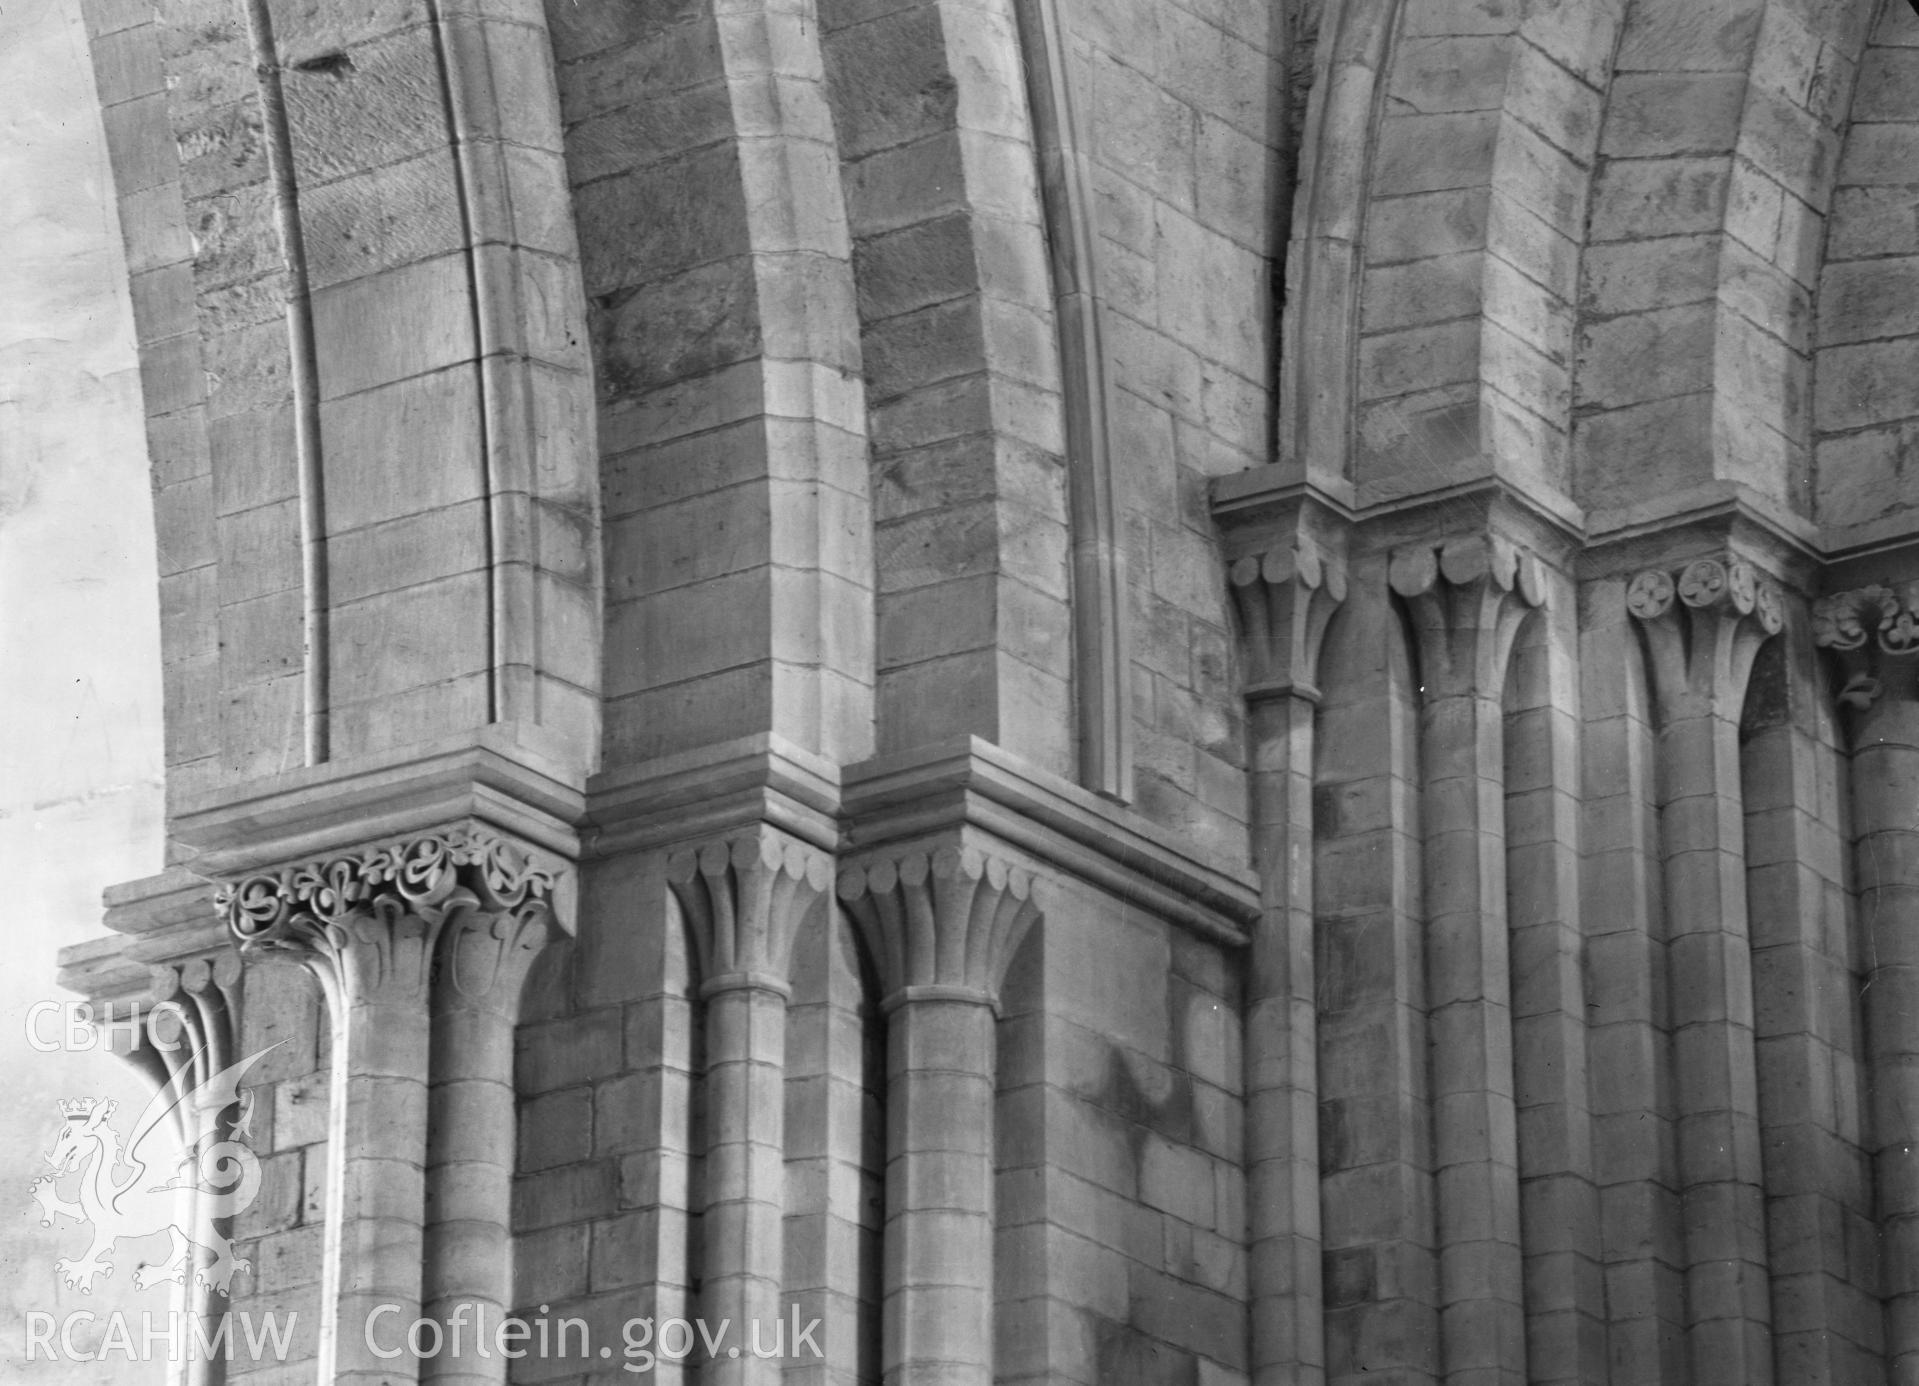 Digital copy of a black and white nitrate negative showing detail of capital at St. David's Cathedral, taken by E.W. Lovegrove, July 1936.